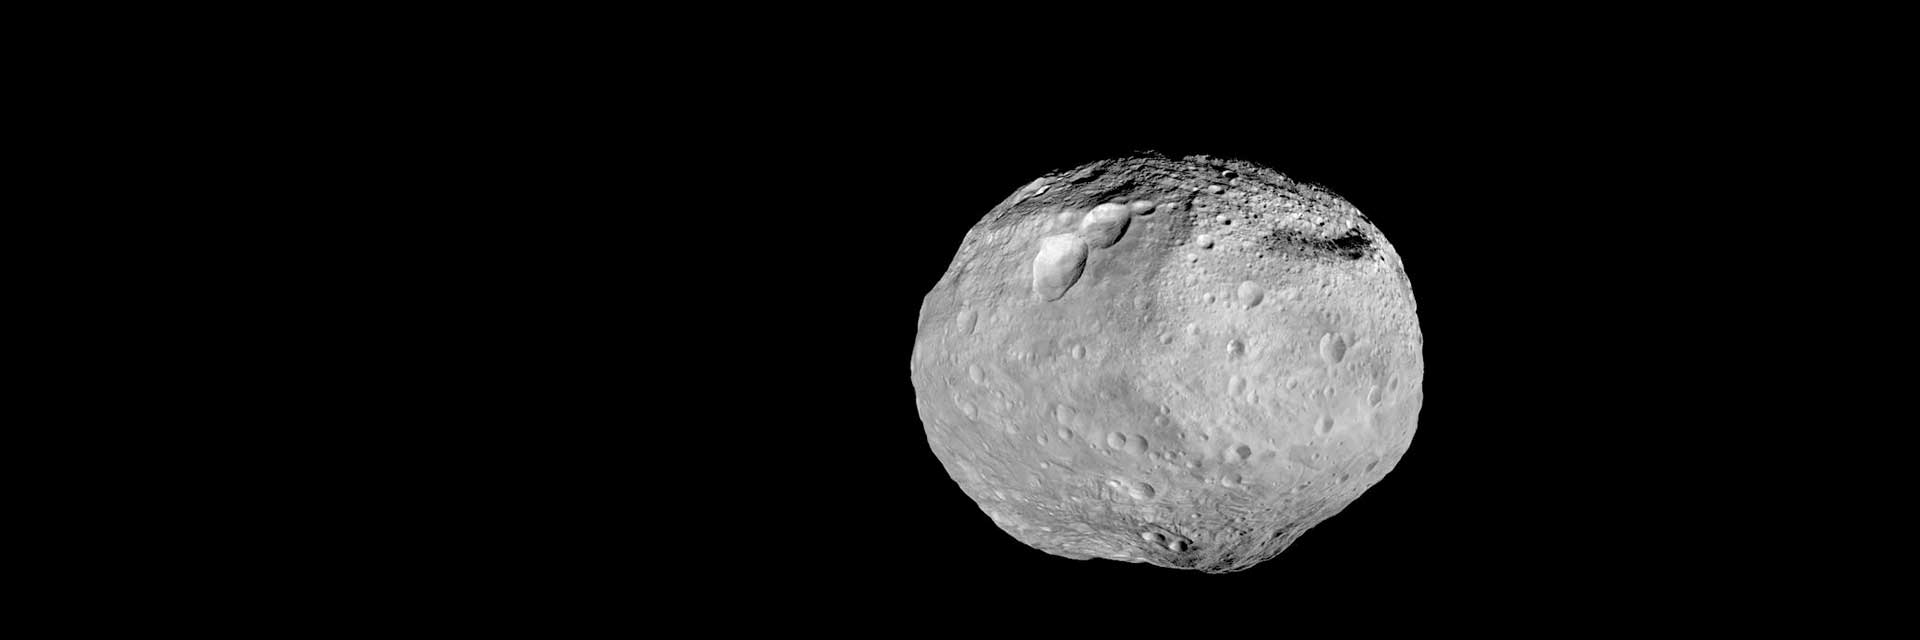 Roundish asteroid in space